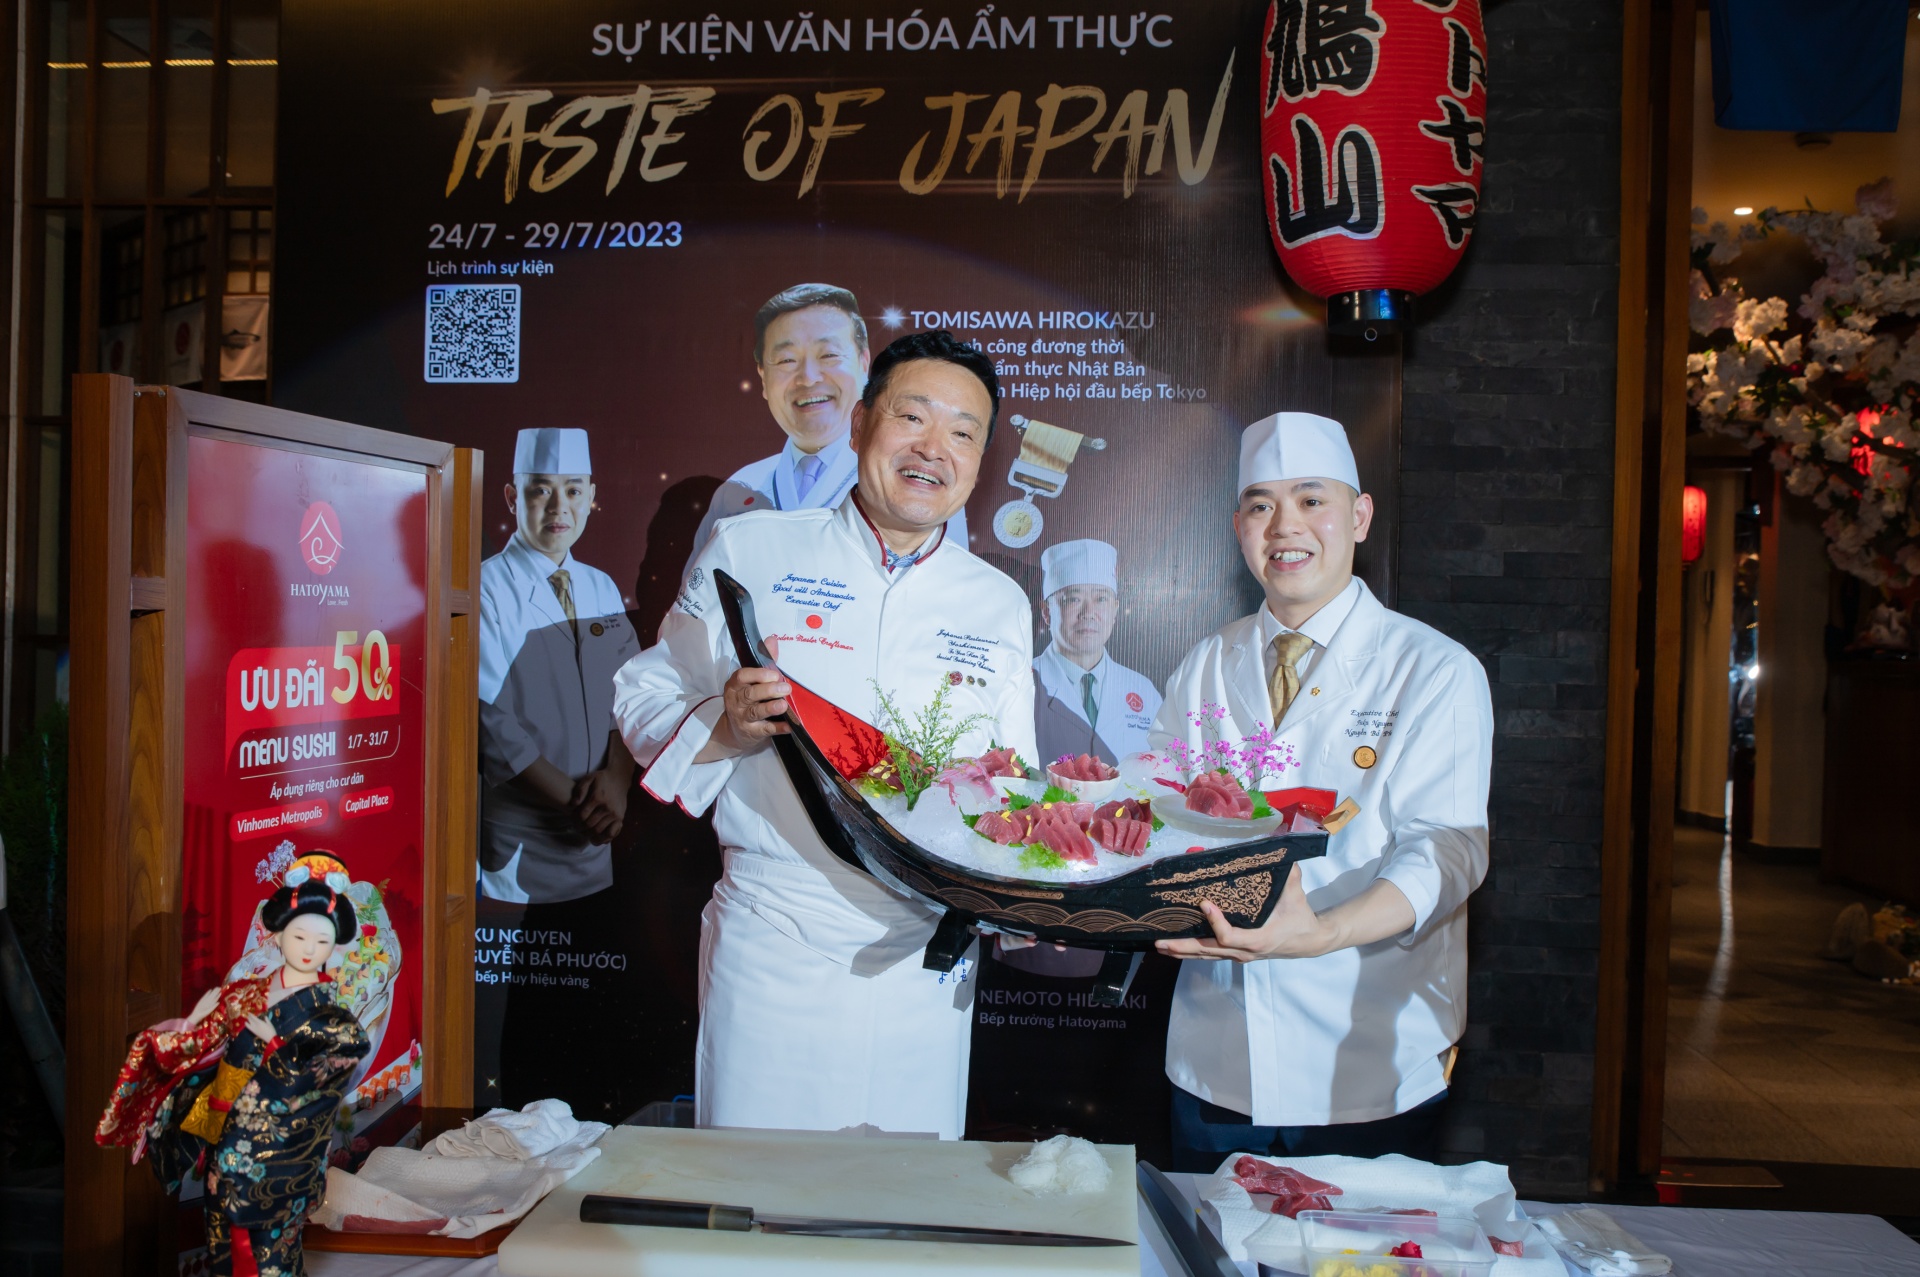 Taste of Japan culinary culture experience